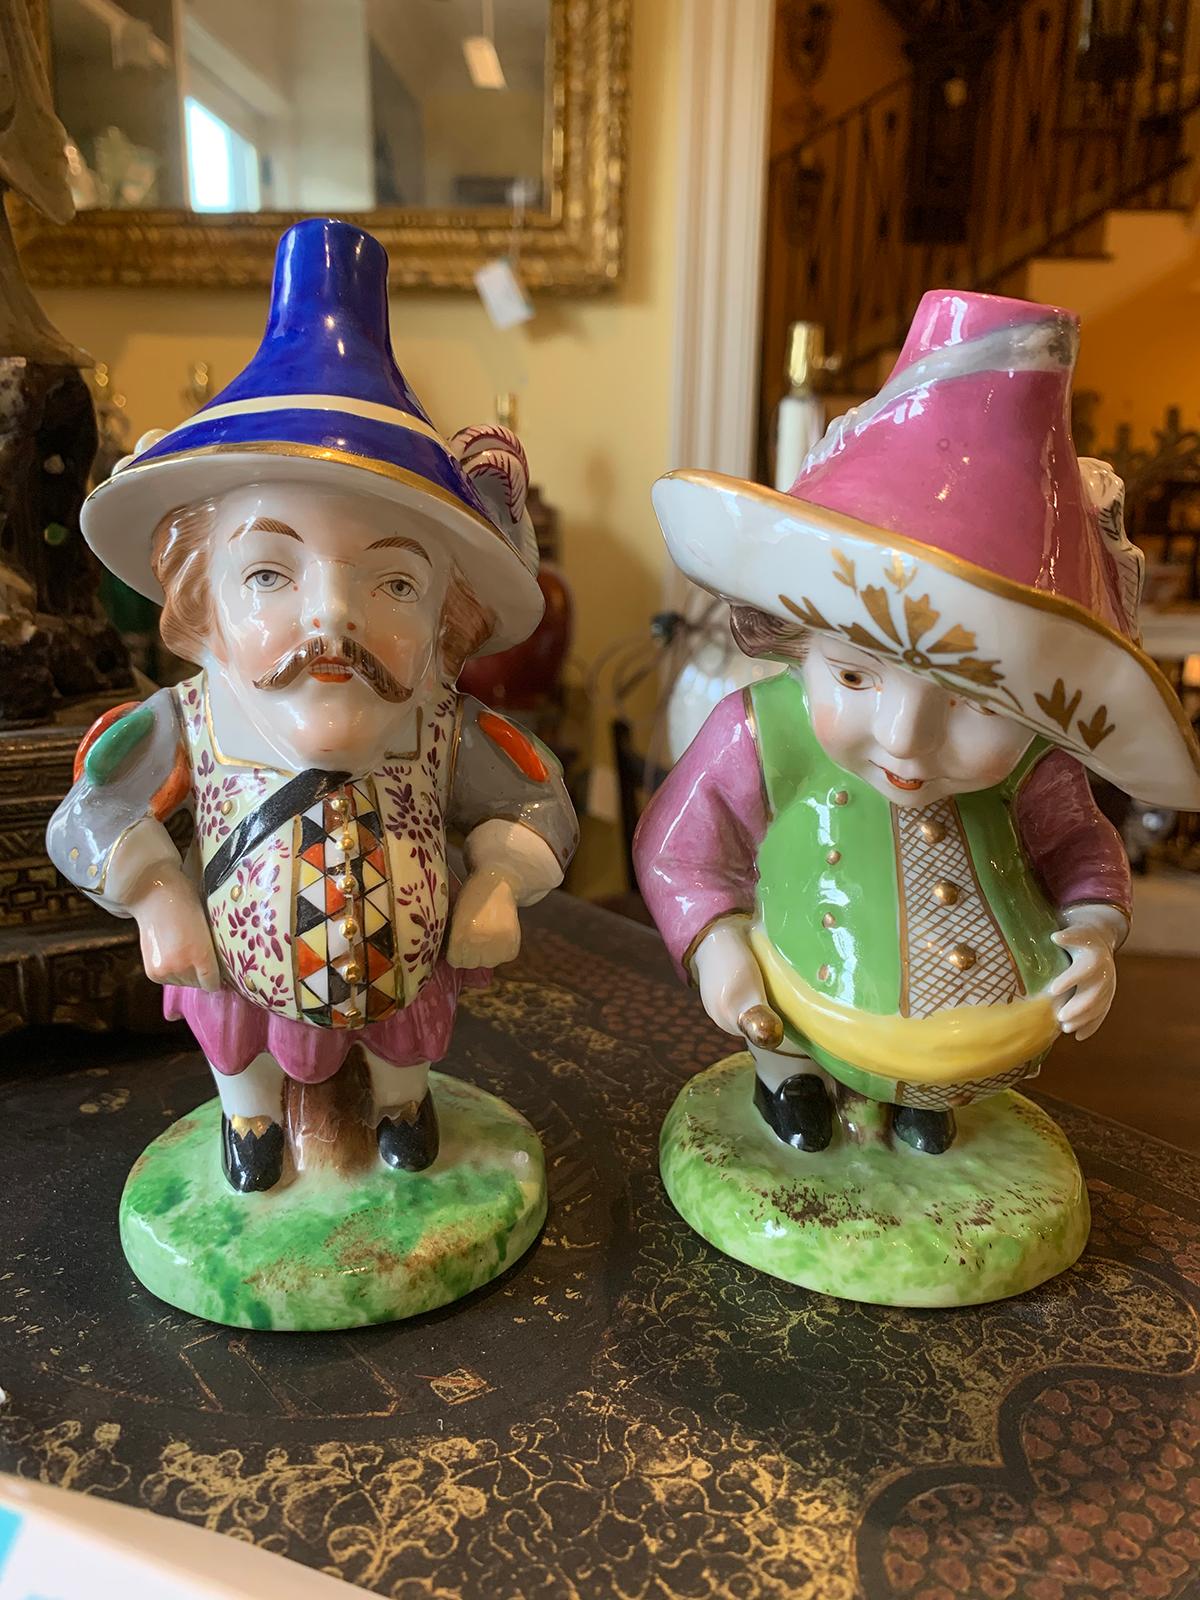 Pair of 19th-20th century English derby style porcelain Mansion House dwarfs, probably Edme Samson, marked U-22A and U-22B, Inspired by Jacques Callots Painting 